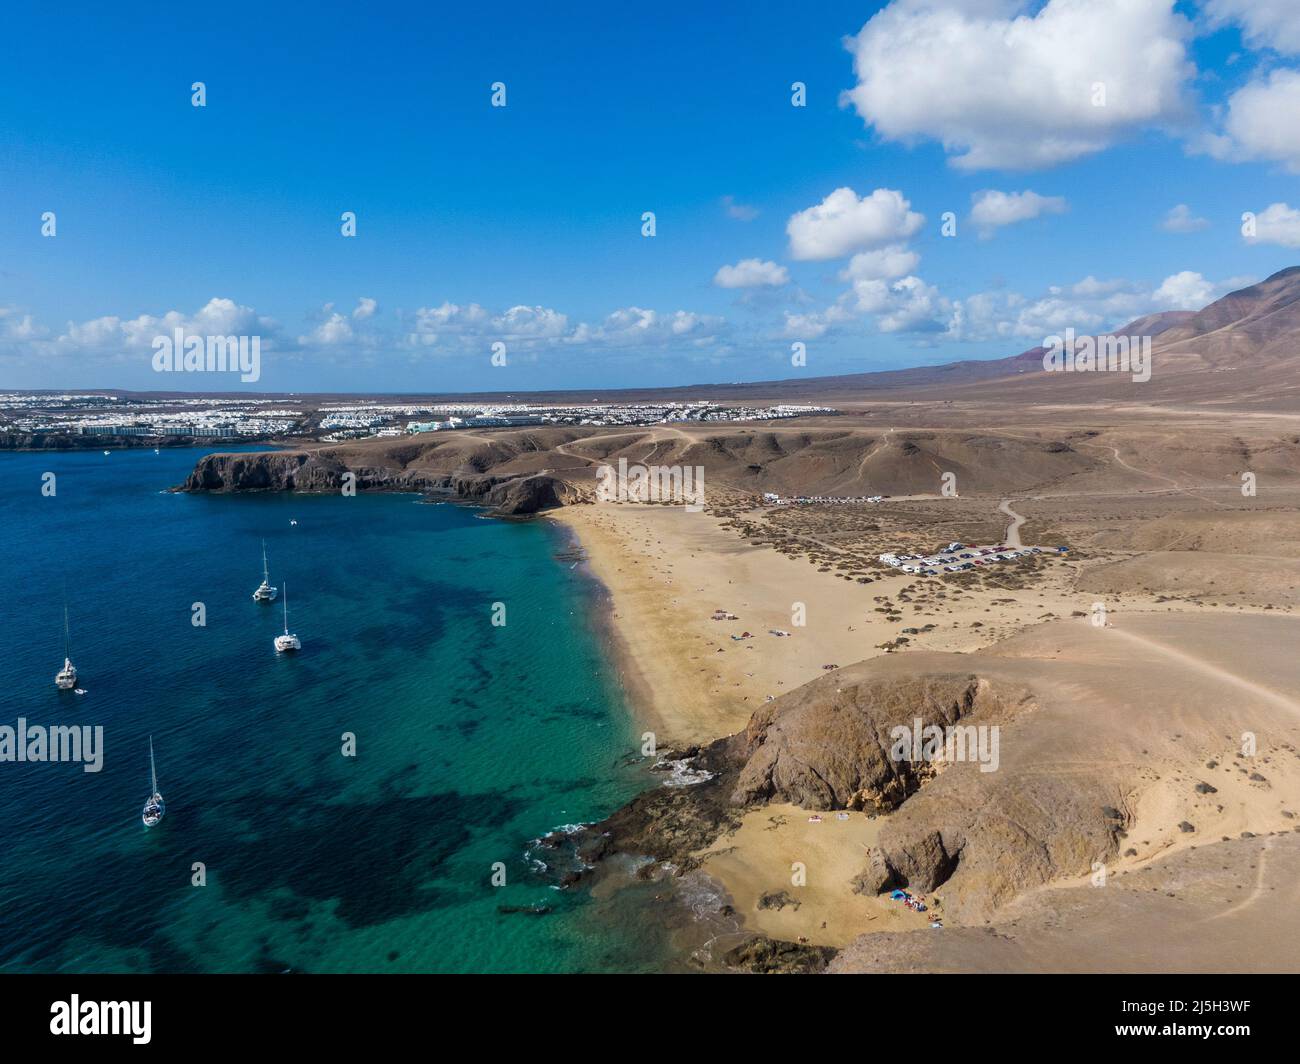 The Playa Mujeres beach on the southern coast of the spanish island of Lanzarote Stock Photo